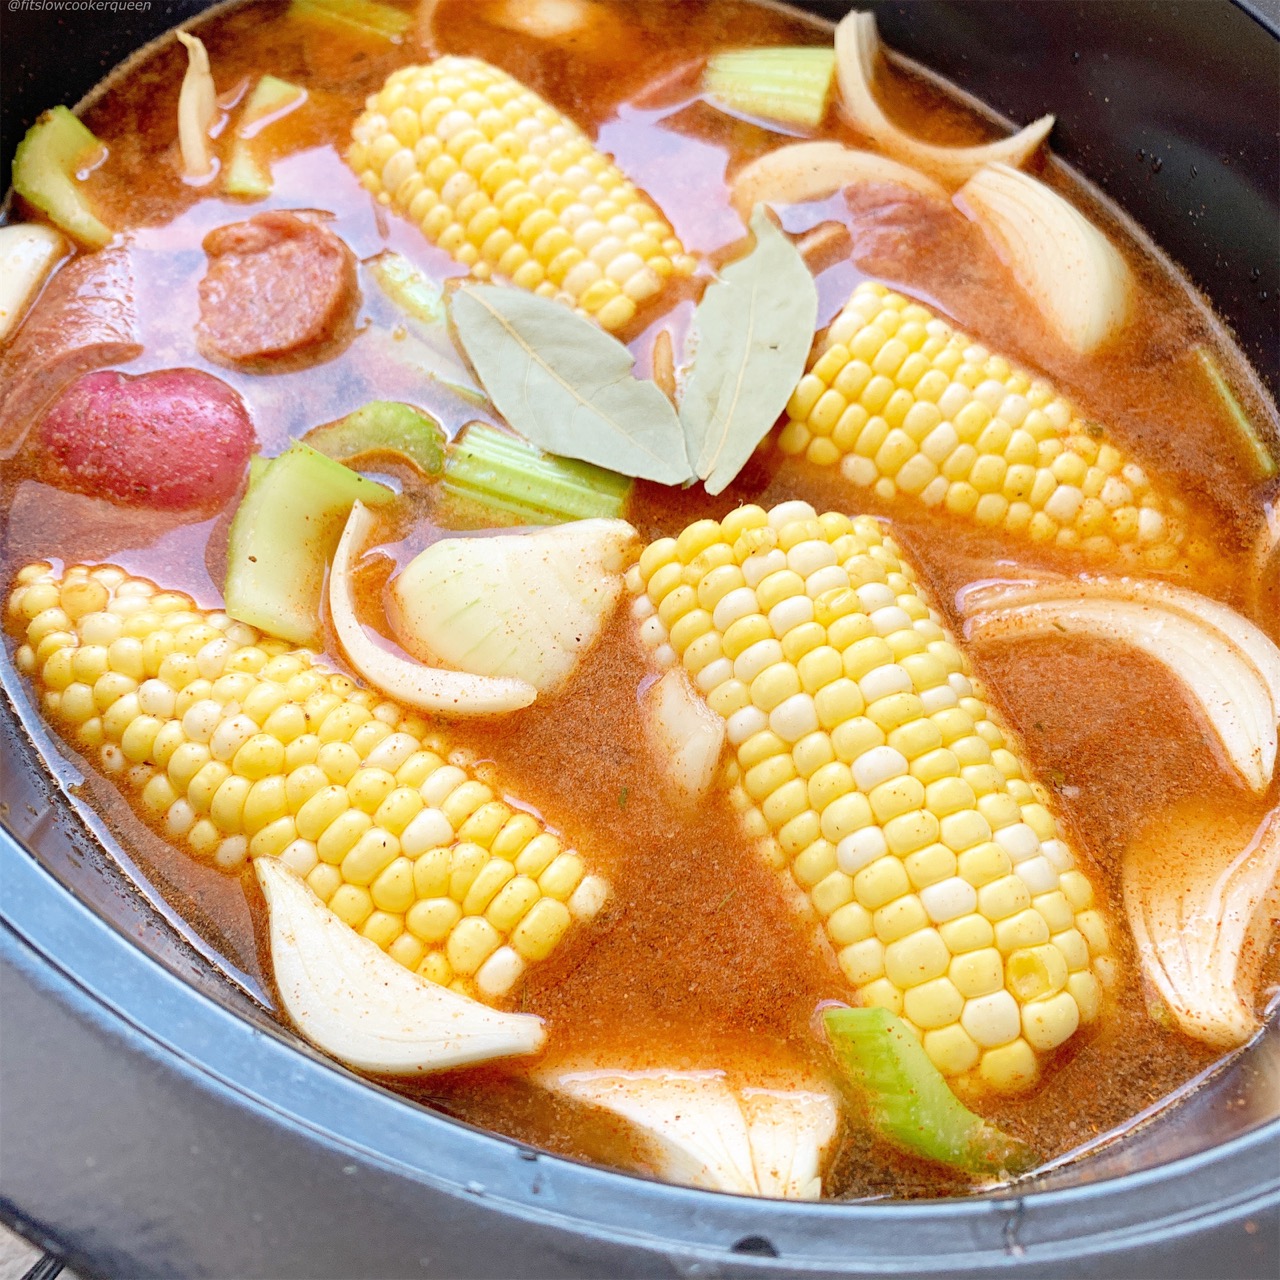 Cajun seasoning spices up this easy slow cooker low country boil. Simple yet packed full of flavor,  you can serve this Cajun dish year-round.